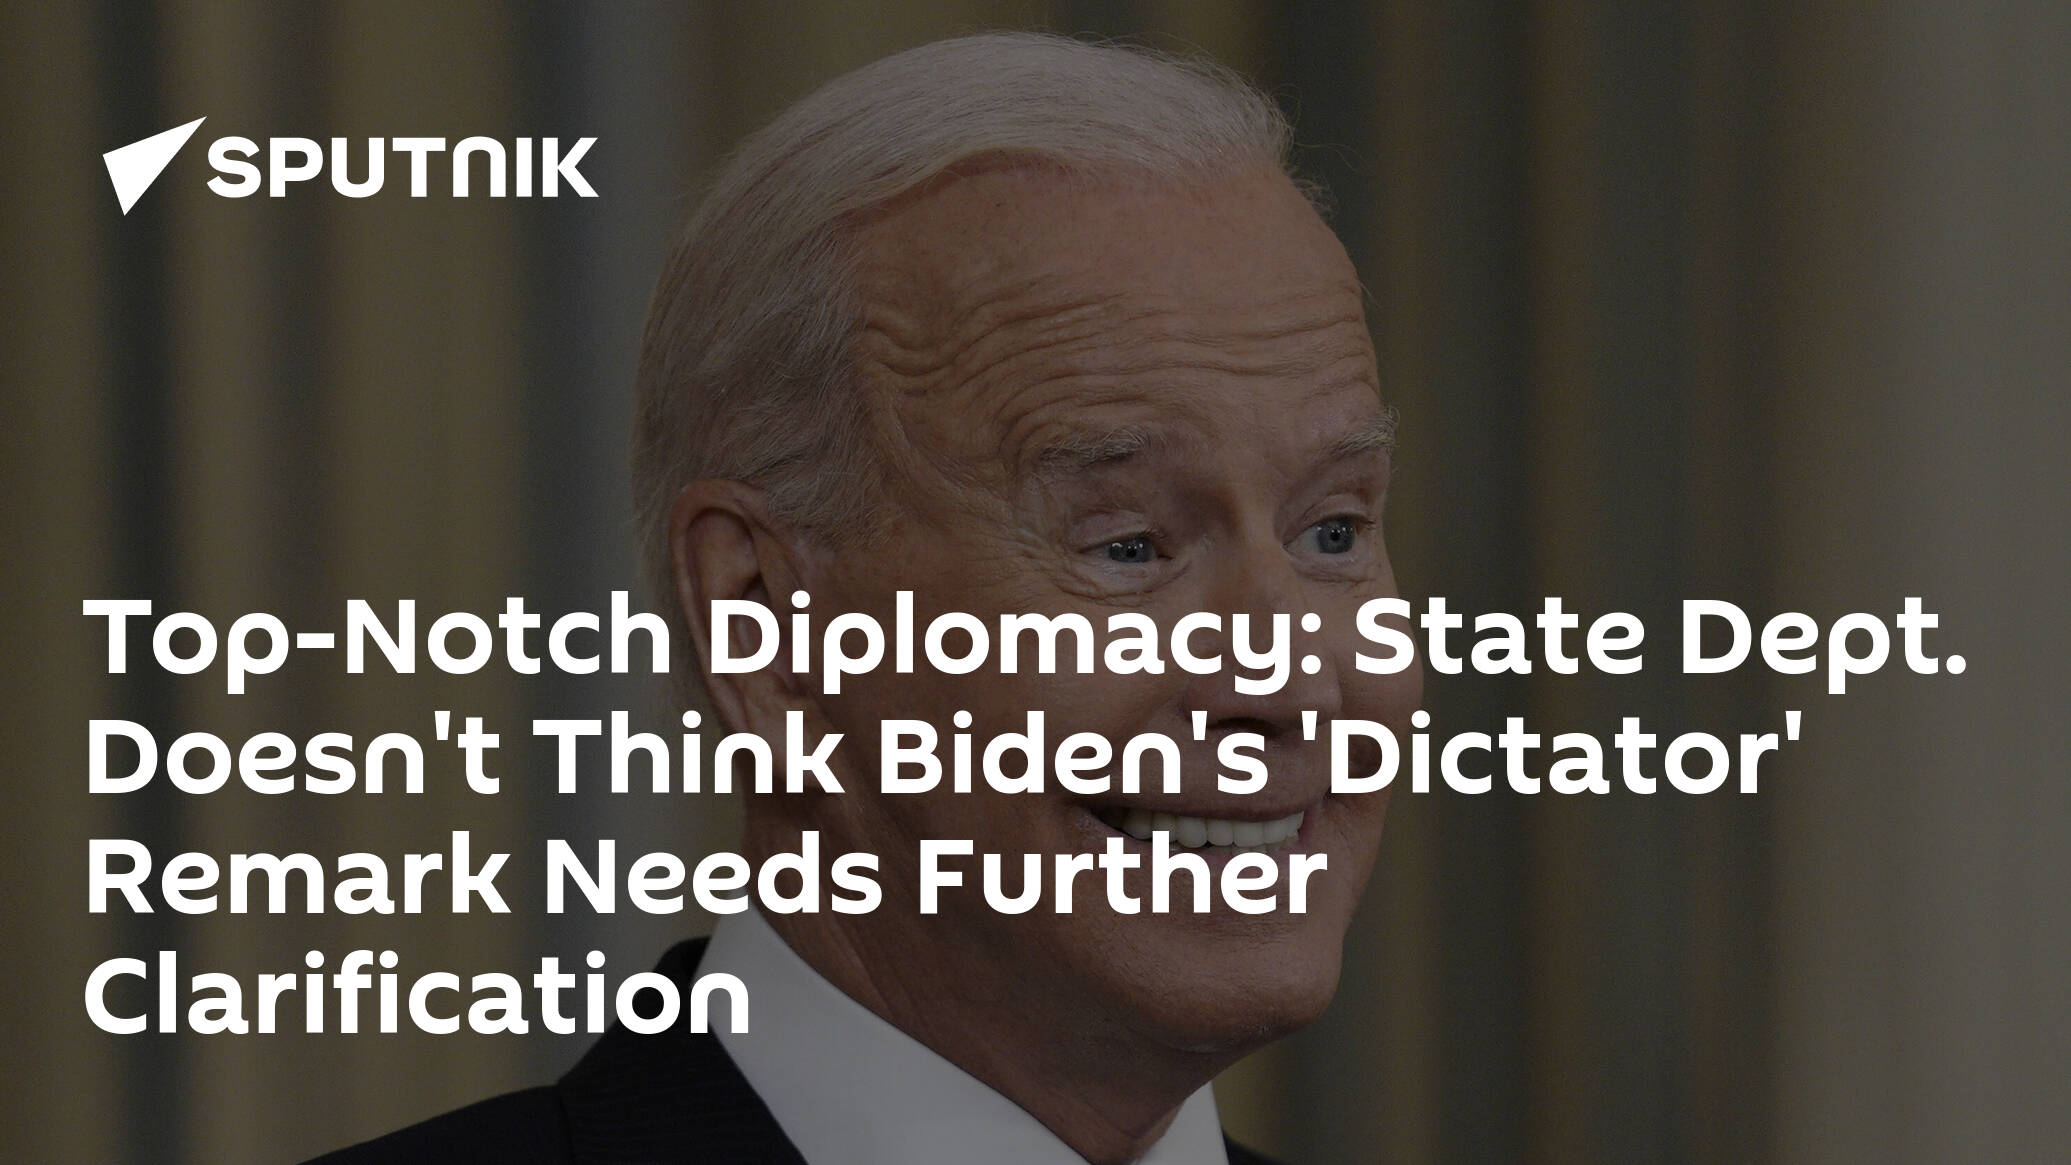 Top-Notch Diplomacy: State Dept. Doesn't Think Biden's 'Dictator' Remark Needs Further Clarification